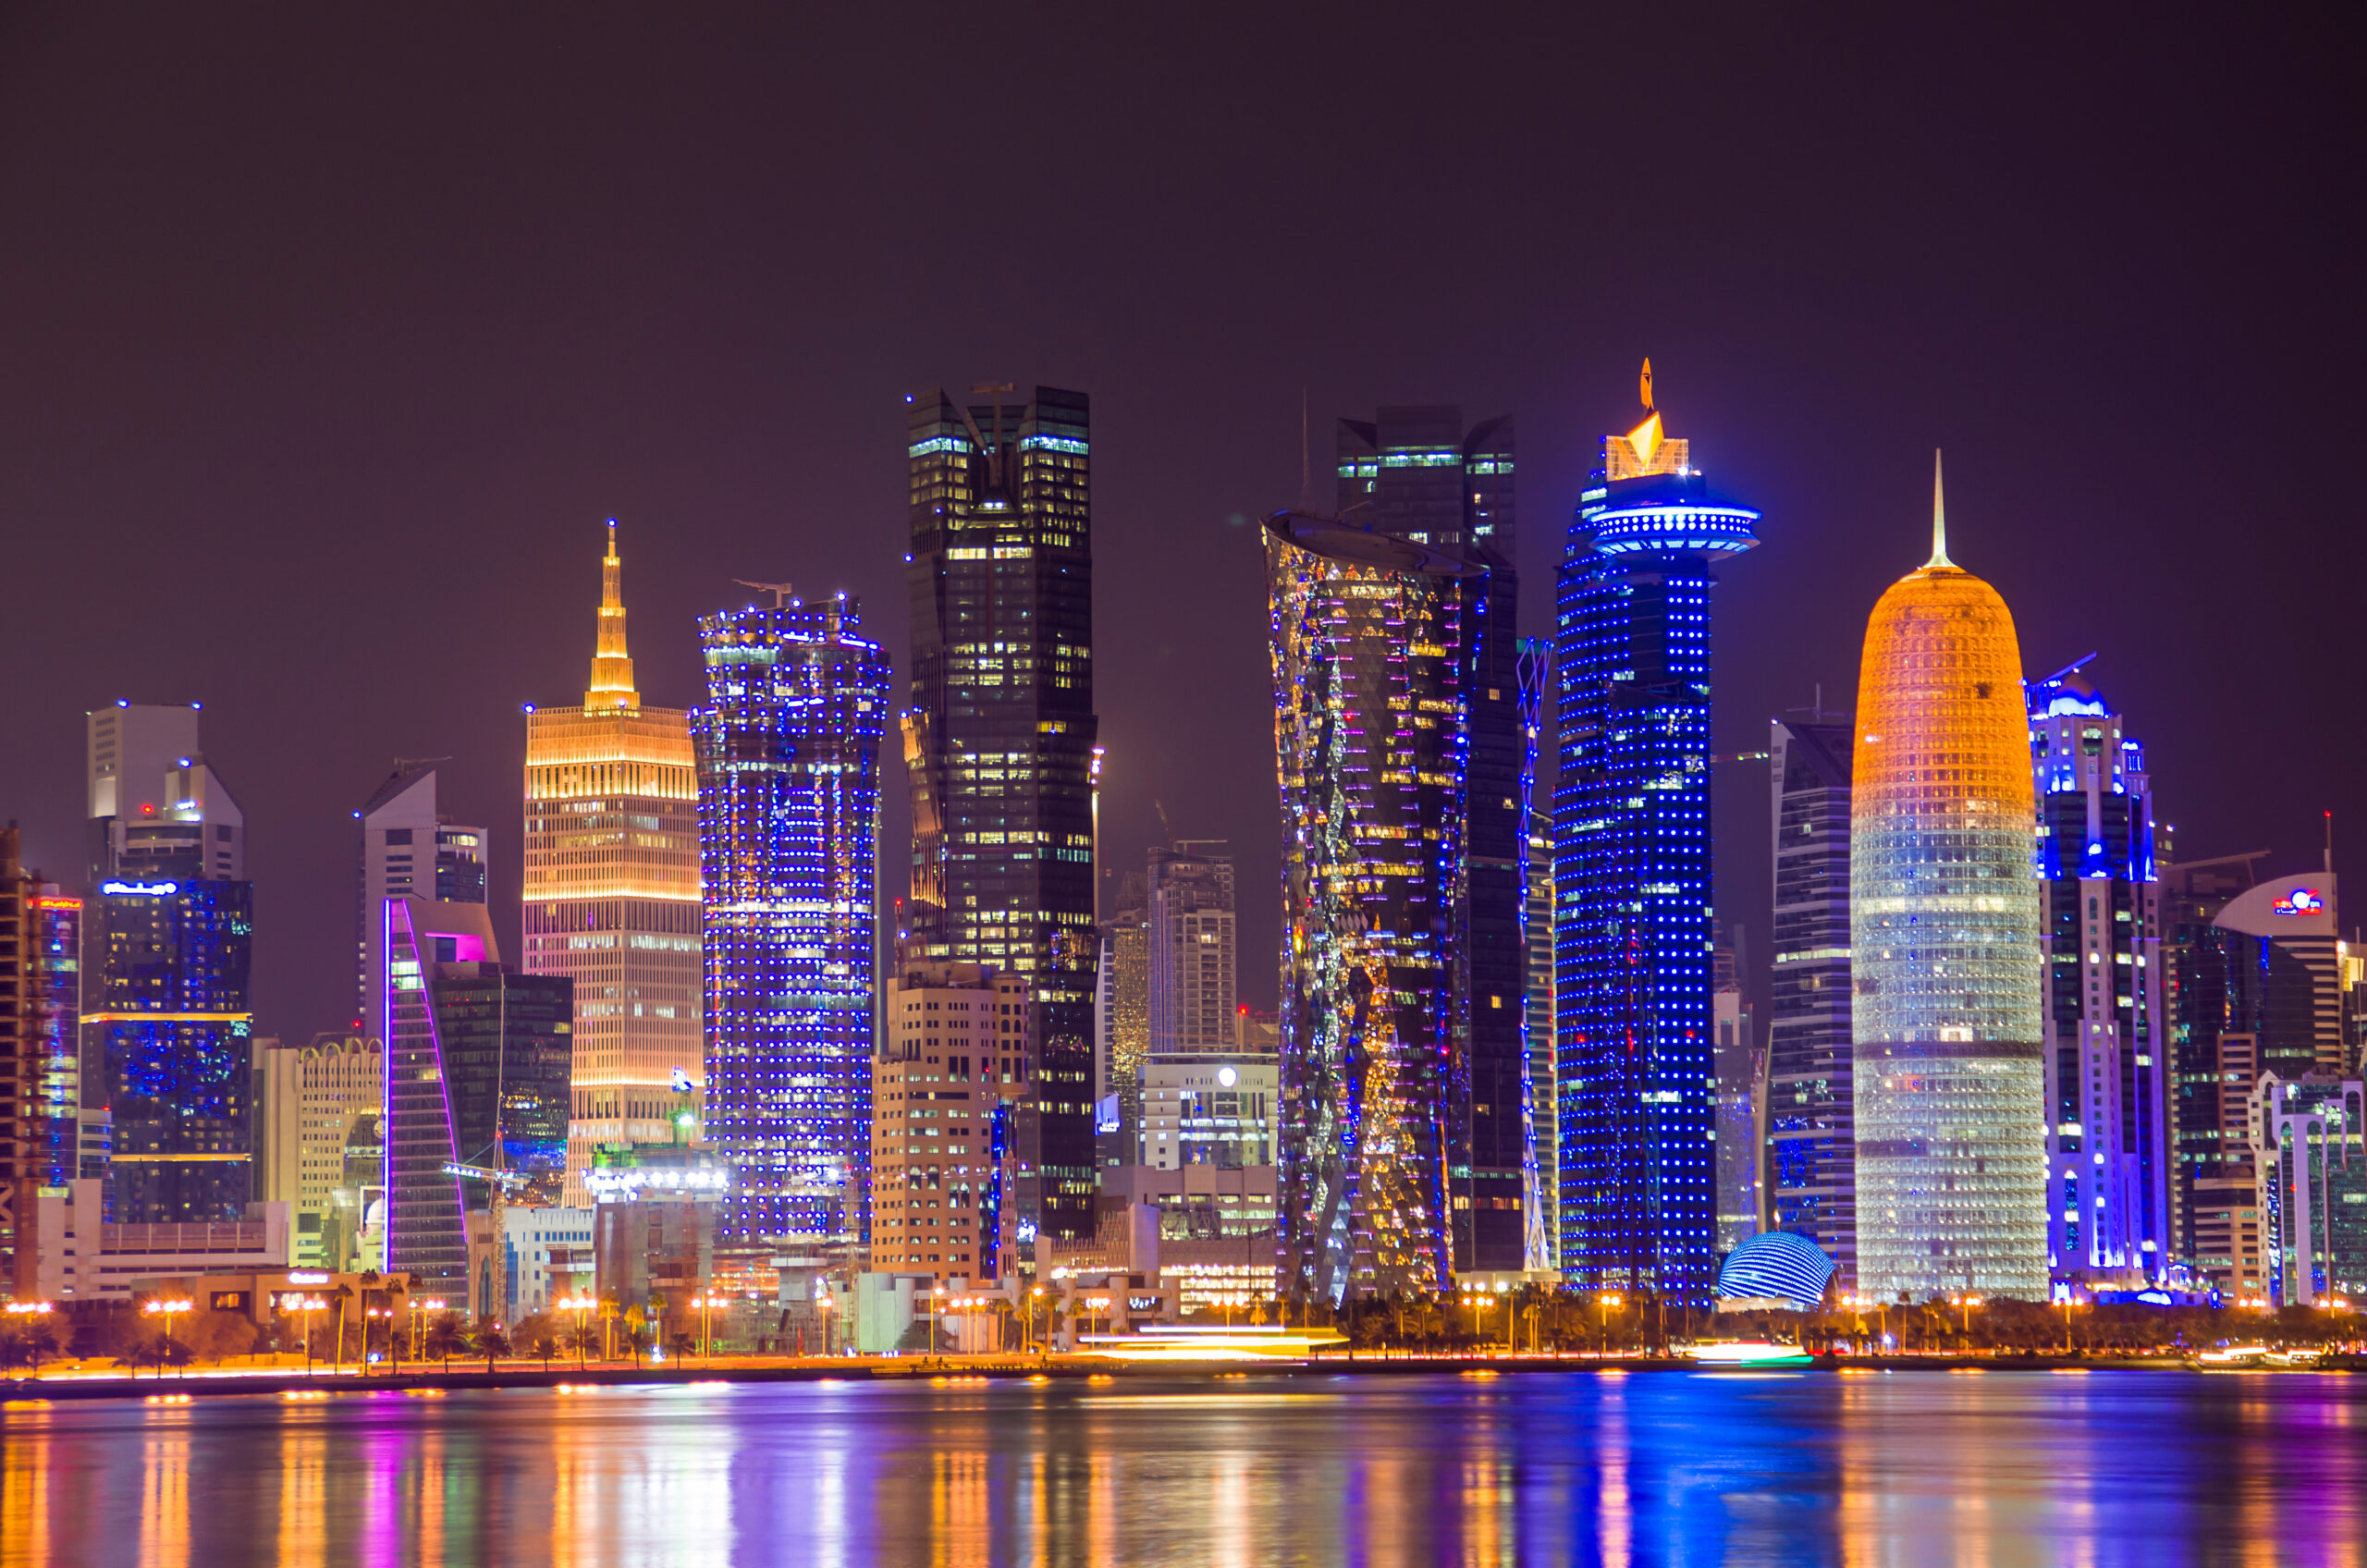 The skyline of the modern and high-rising city of Doha in Qatar,